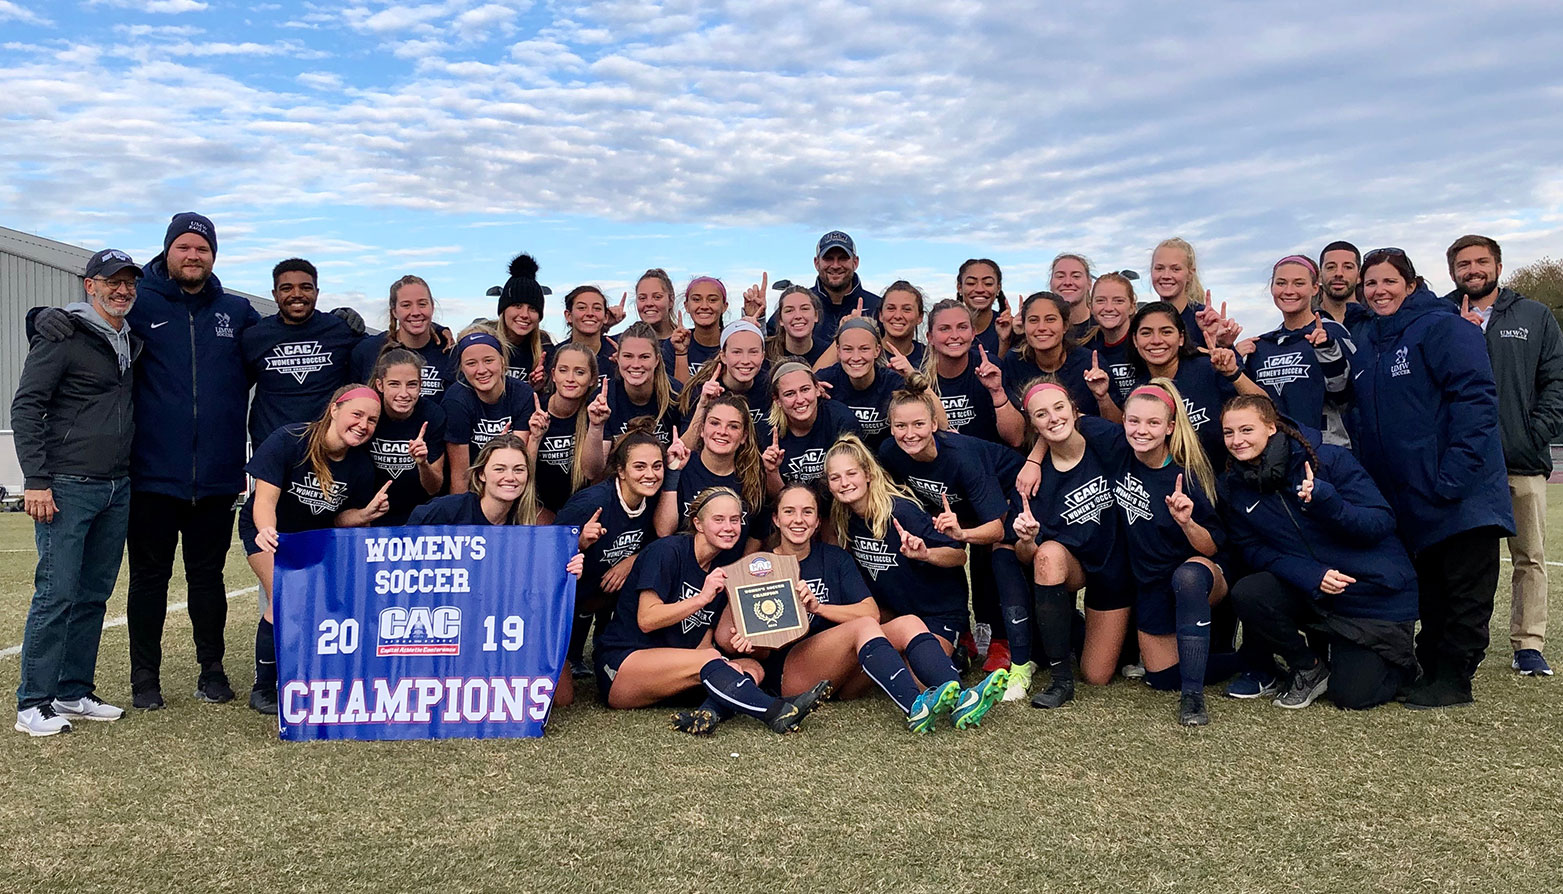 Mary Washington Captures 2019 CAC Women's Soccer Championship in Dominant Fashion